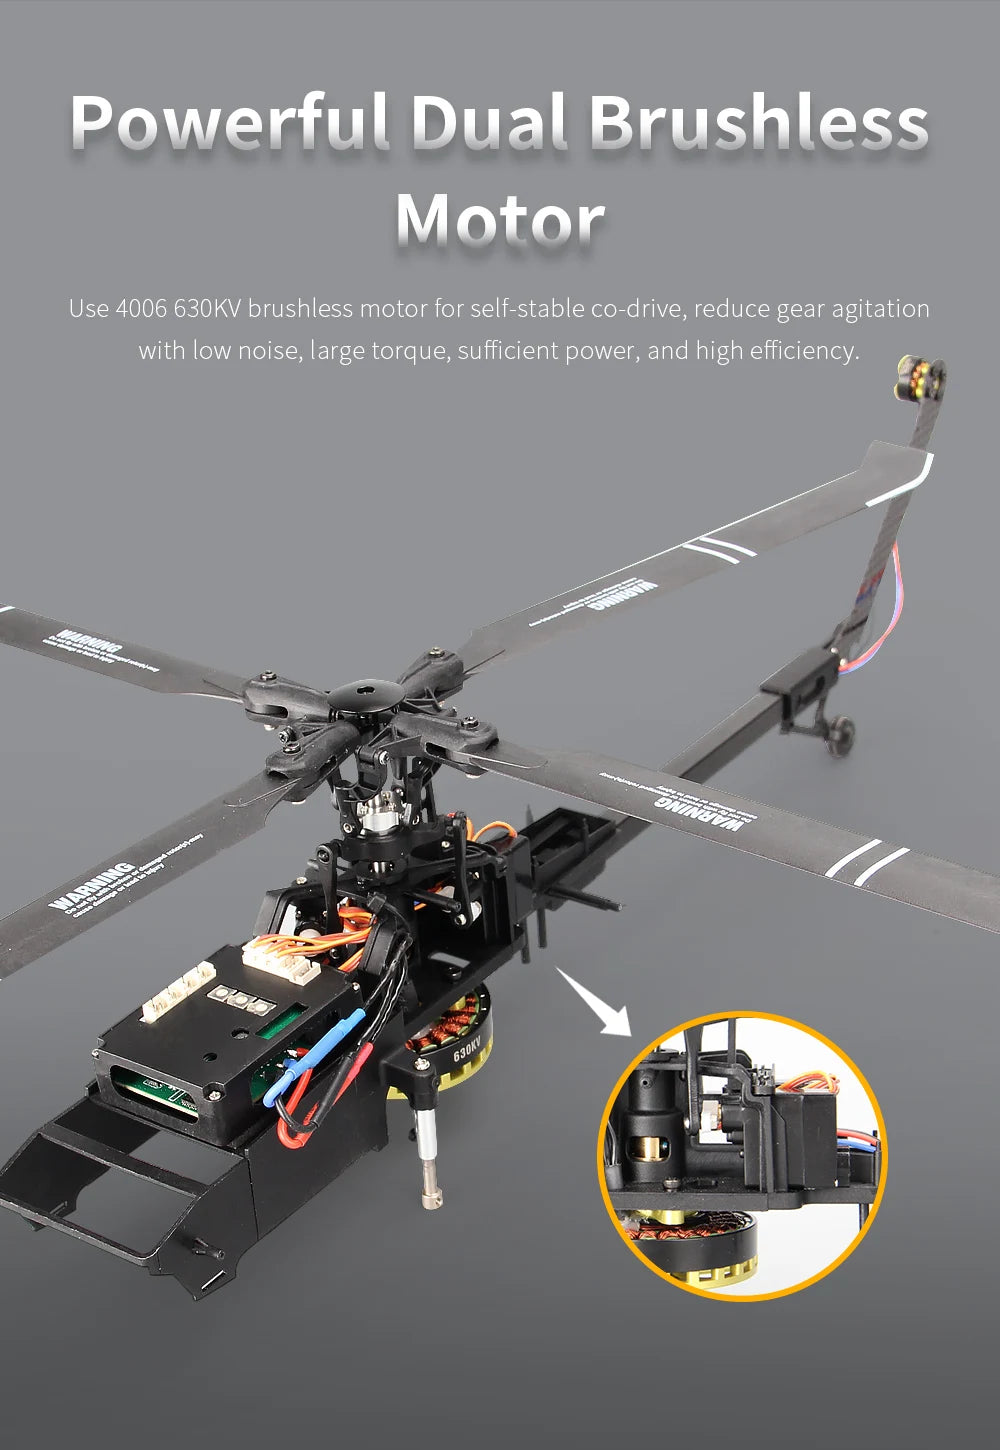 F09 RC Helicopter, powerful dual brushless motor for self-stable co-drive, reduce gear agitation